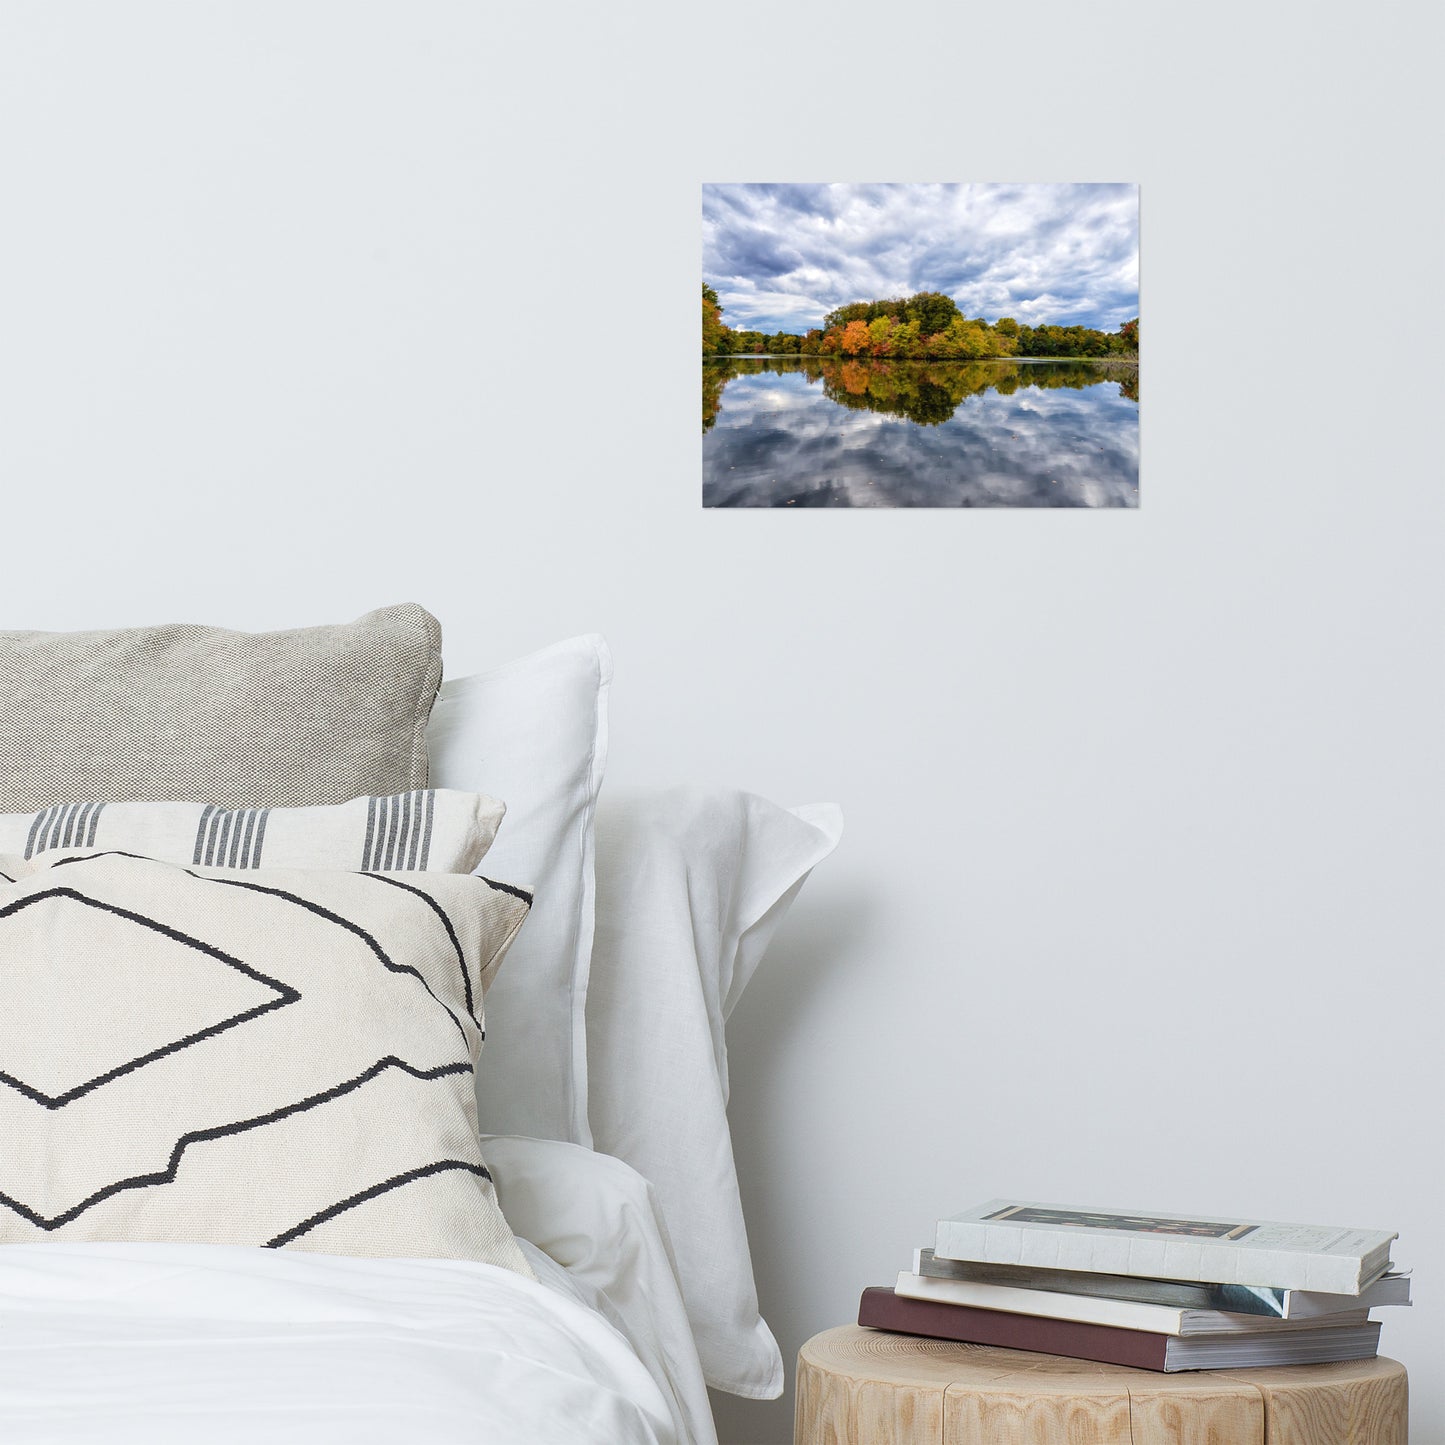 Simple Wall Decor Bedroom: Fall Trees on Edge of Pond With Stormy Sky - Rustic / Rural / Country Style Landscape / Nature Loose / Unframed / Frameless / Frameable Photograph Wall Art Print - Artwork